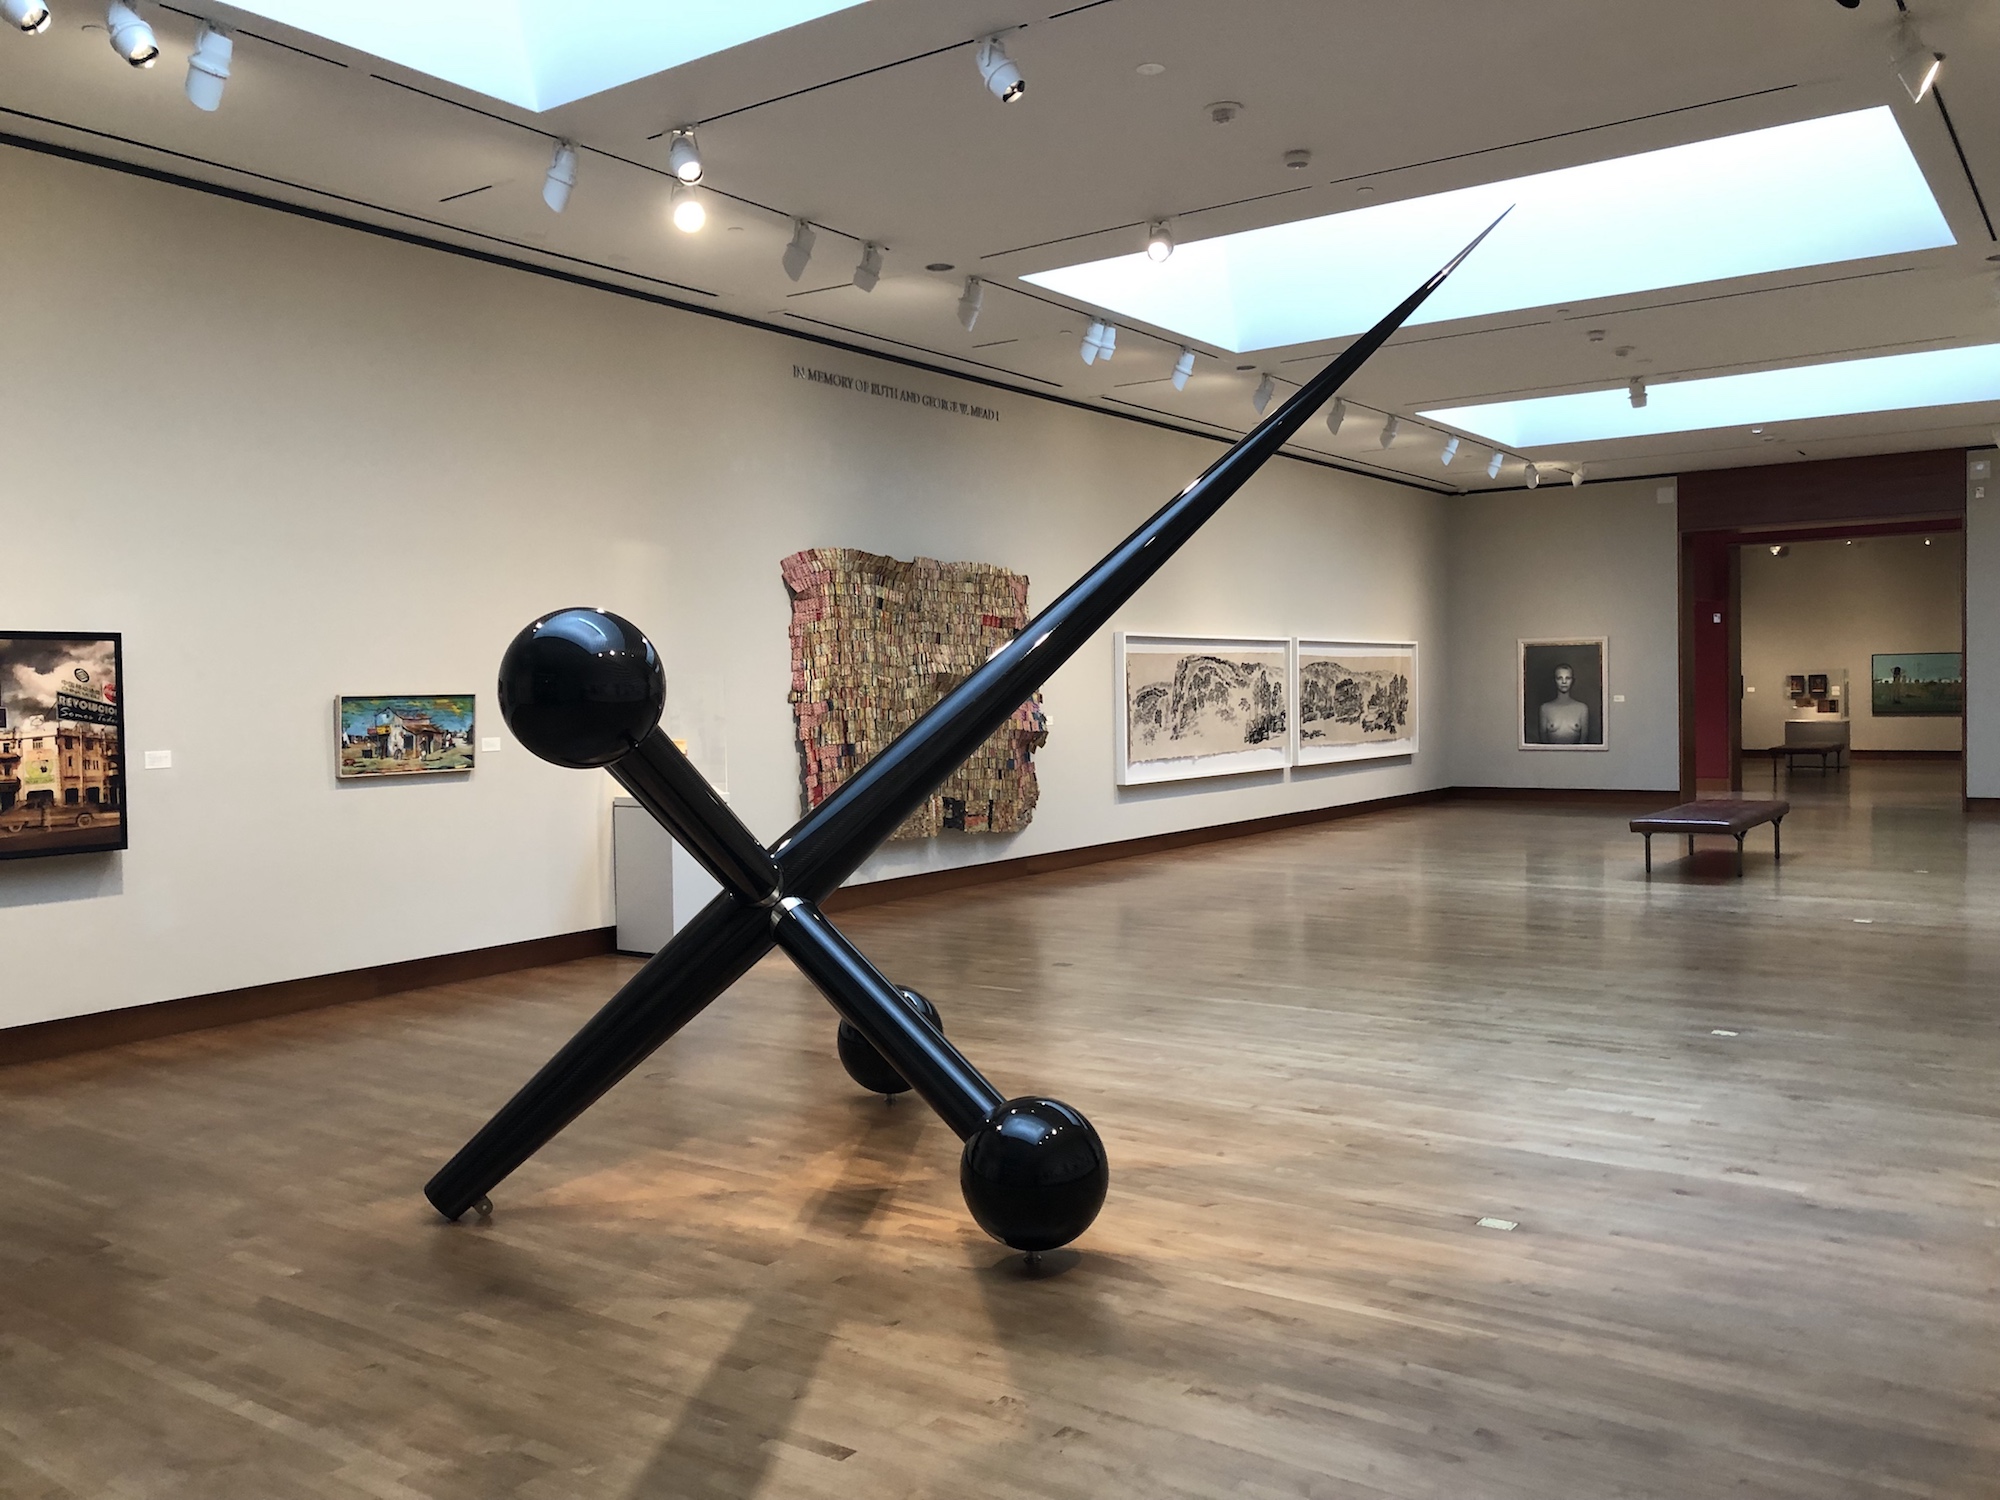 Black Jack by Tinigo Manglano-Ovalle at the Chazen Museum of Art in Madison Wisconsin.